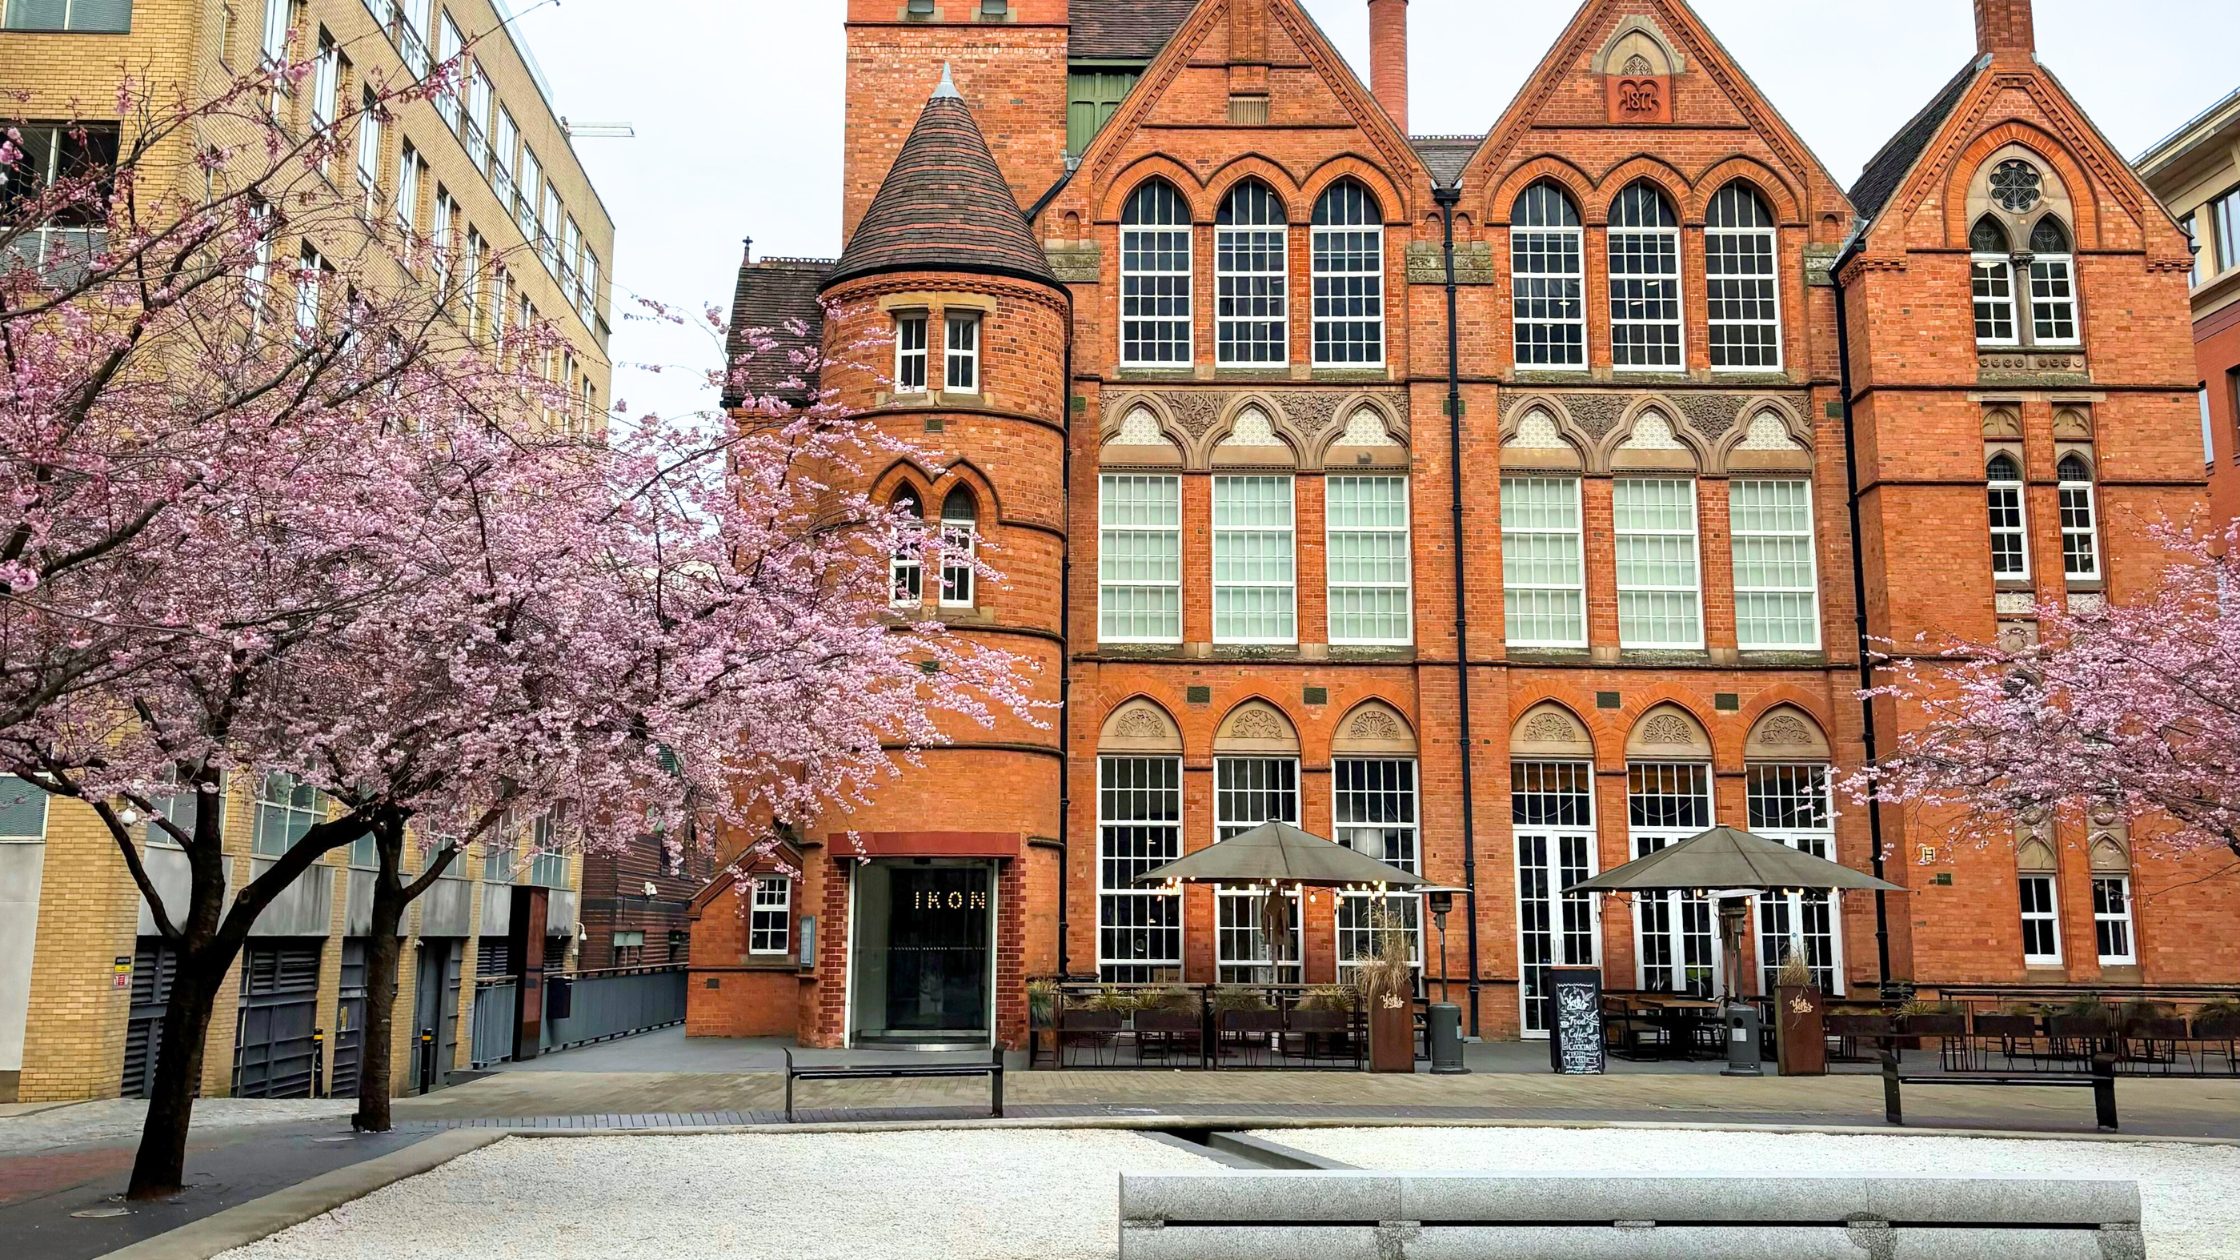 IKON Gallery in Oozells Square, Birmingham. Surrounded by cherry blossom trees.